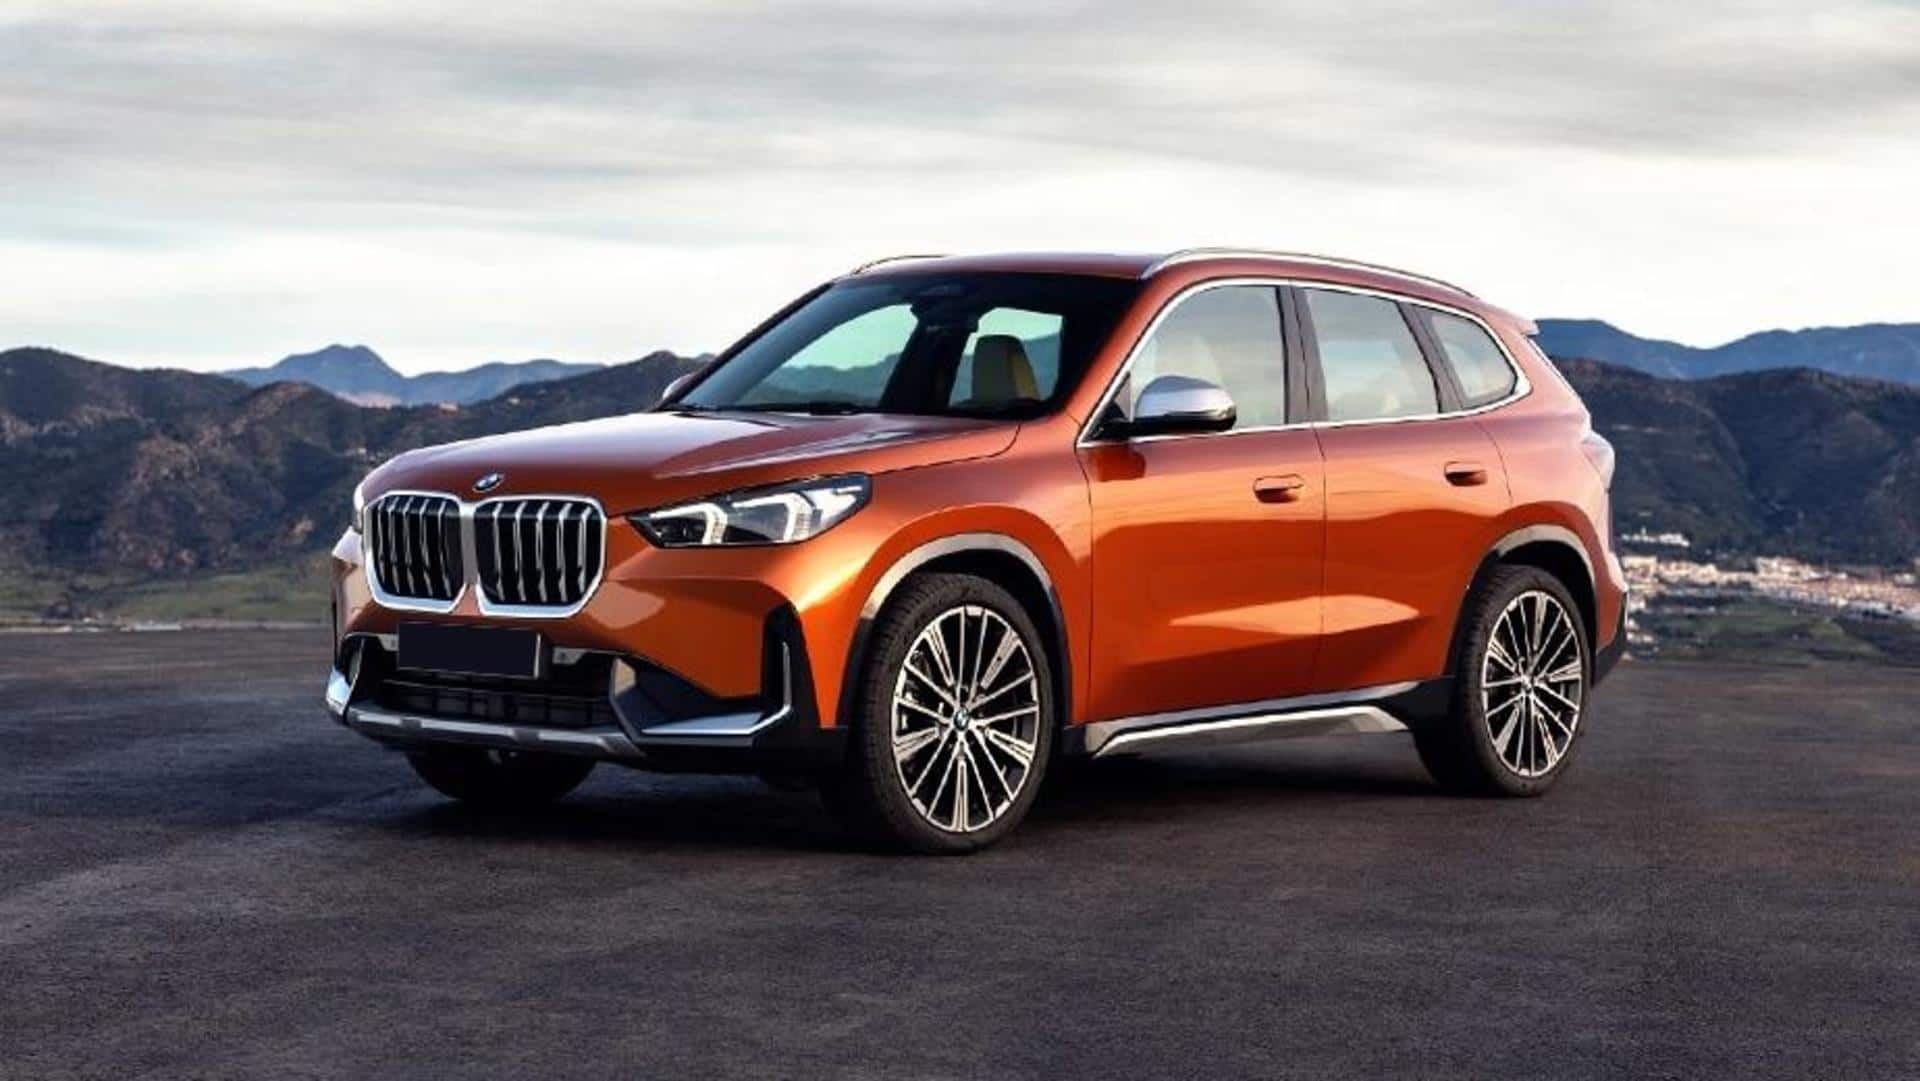 BMW X1 to launch on January 28: Check rival SUVs